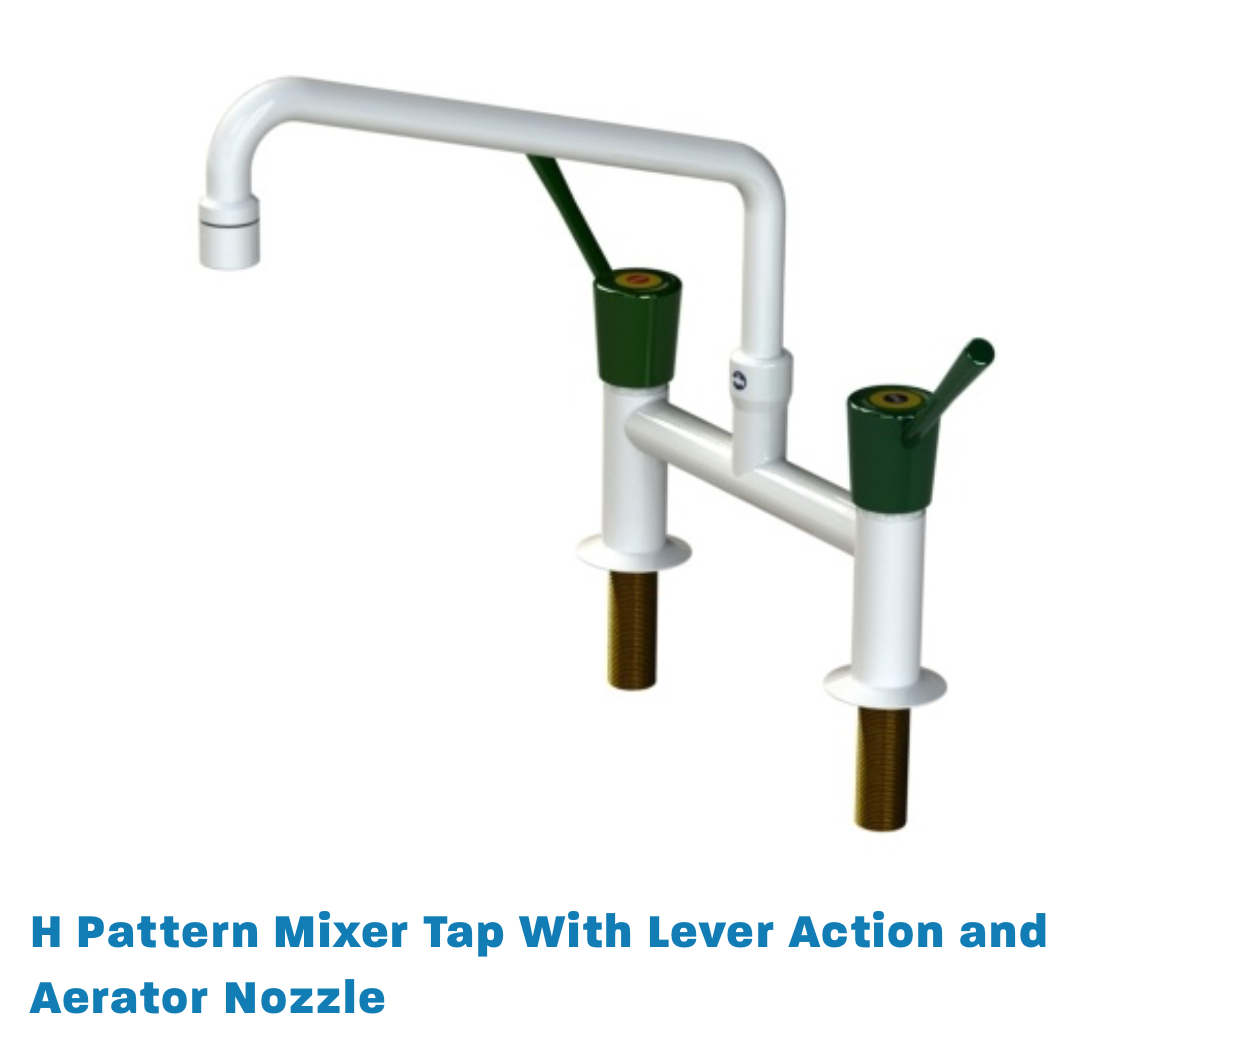 Laboratory swivel swan neck wrist action levers mixer hot and cold water taps school or commercial 